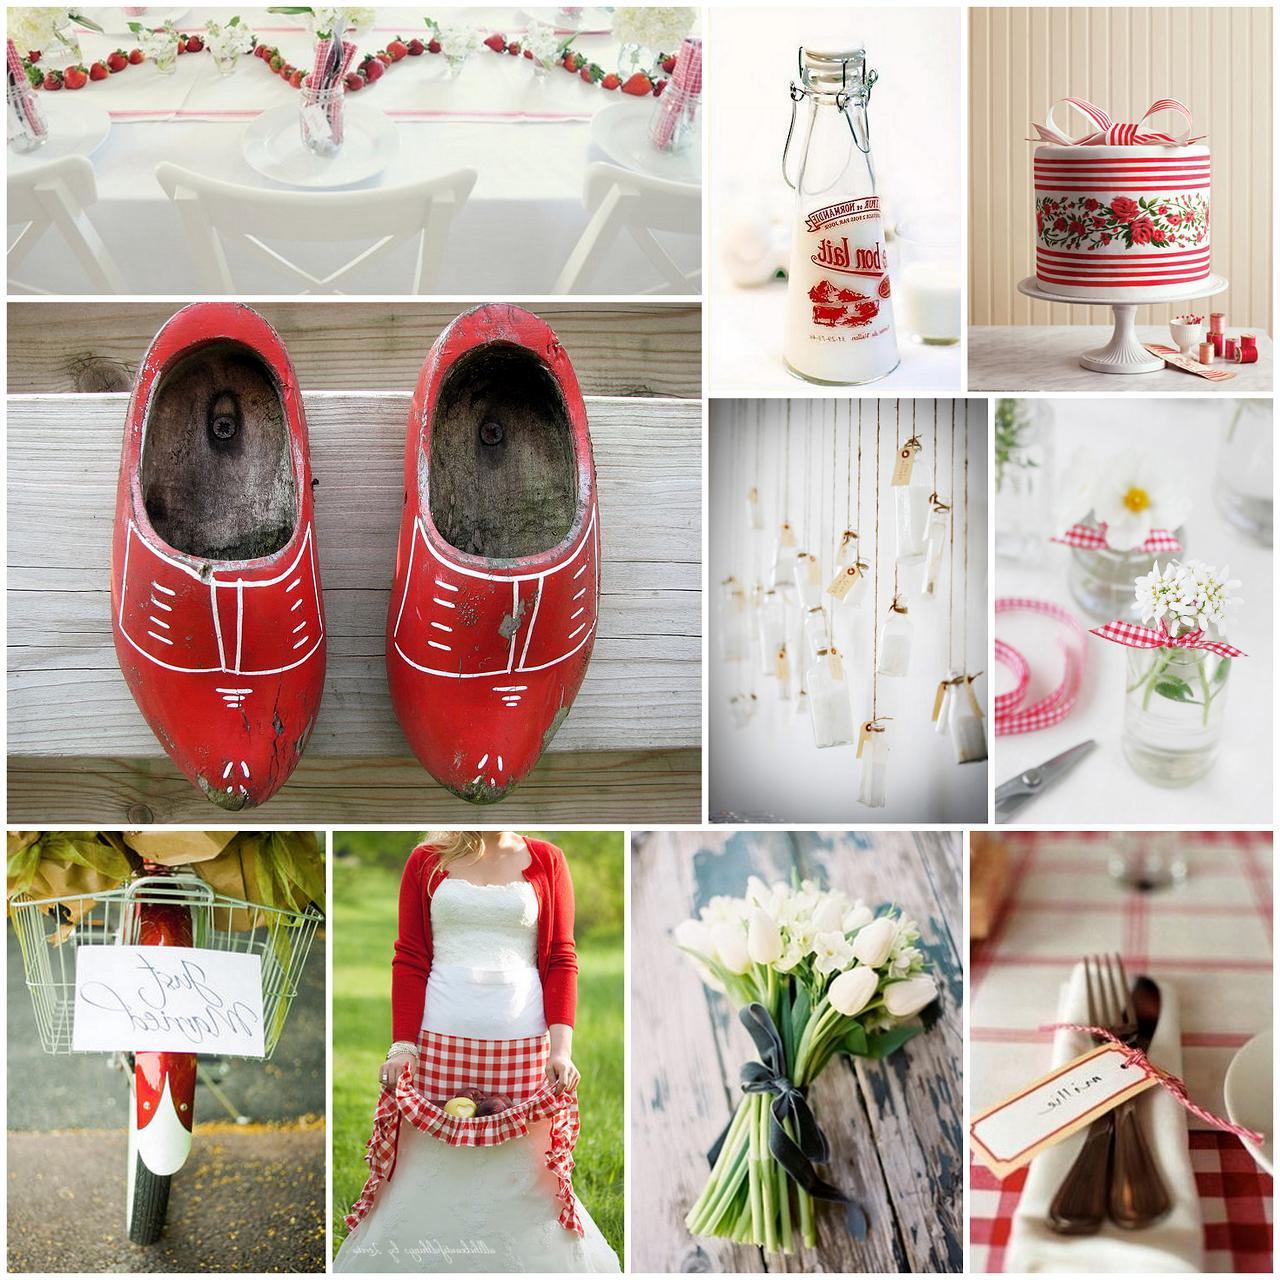 The red and white gingham